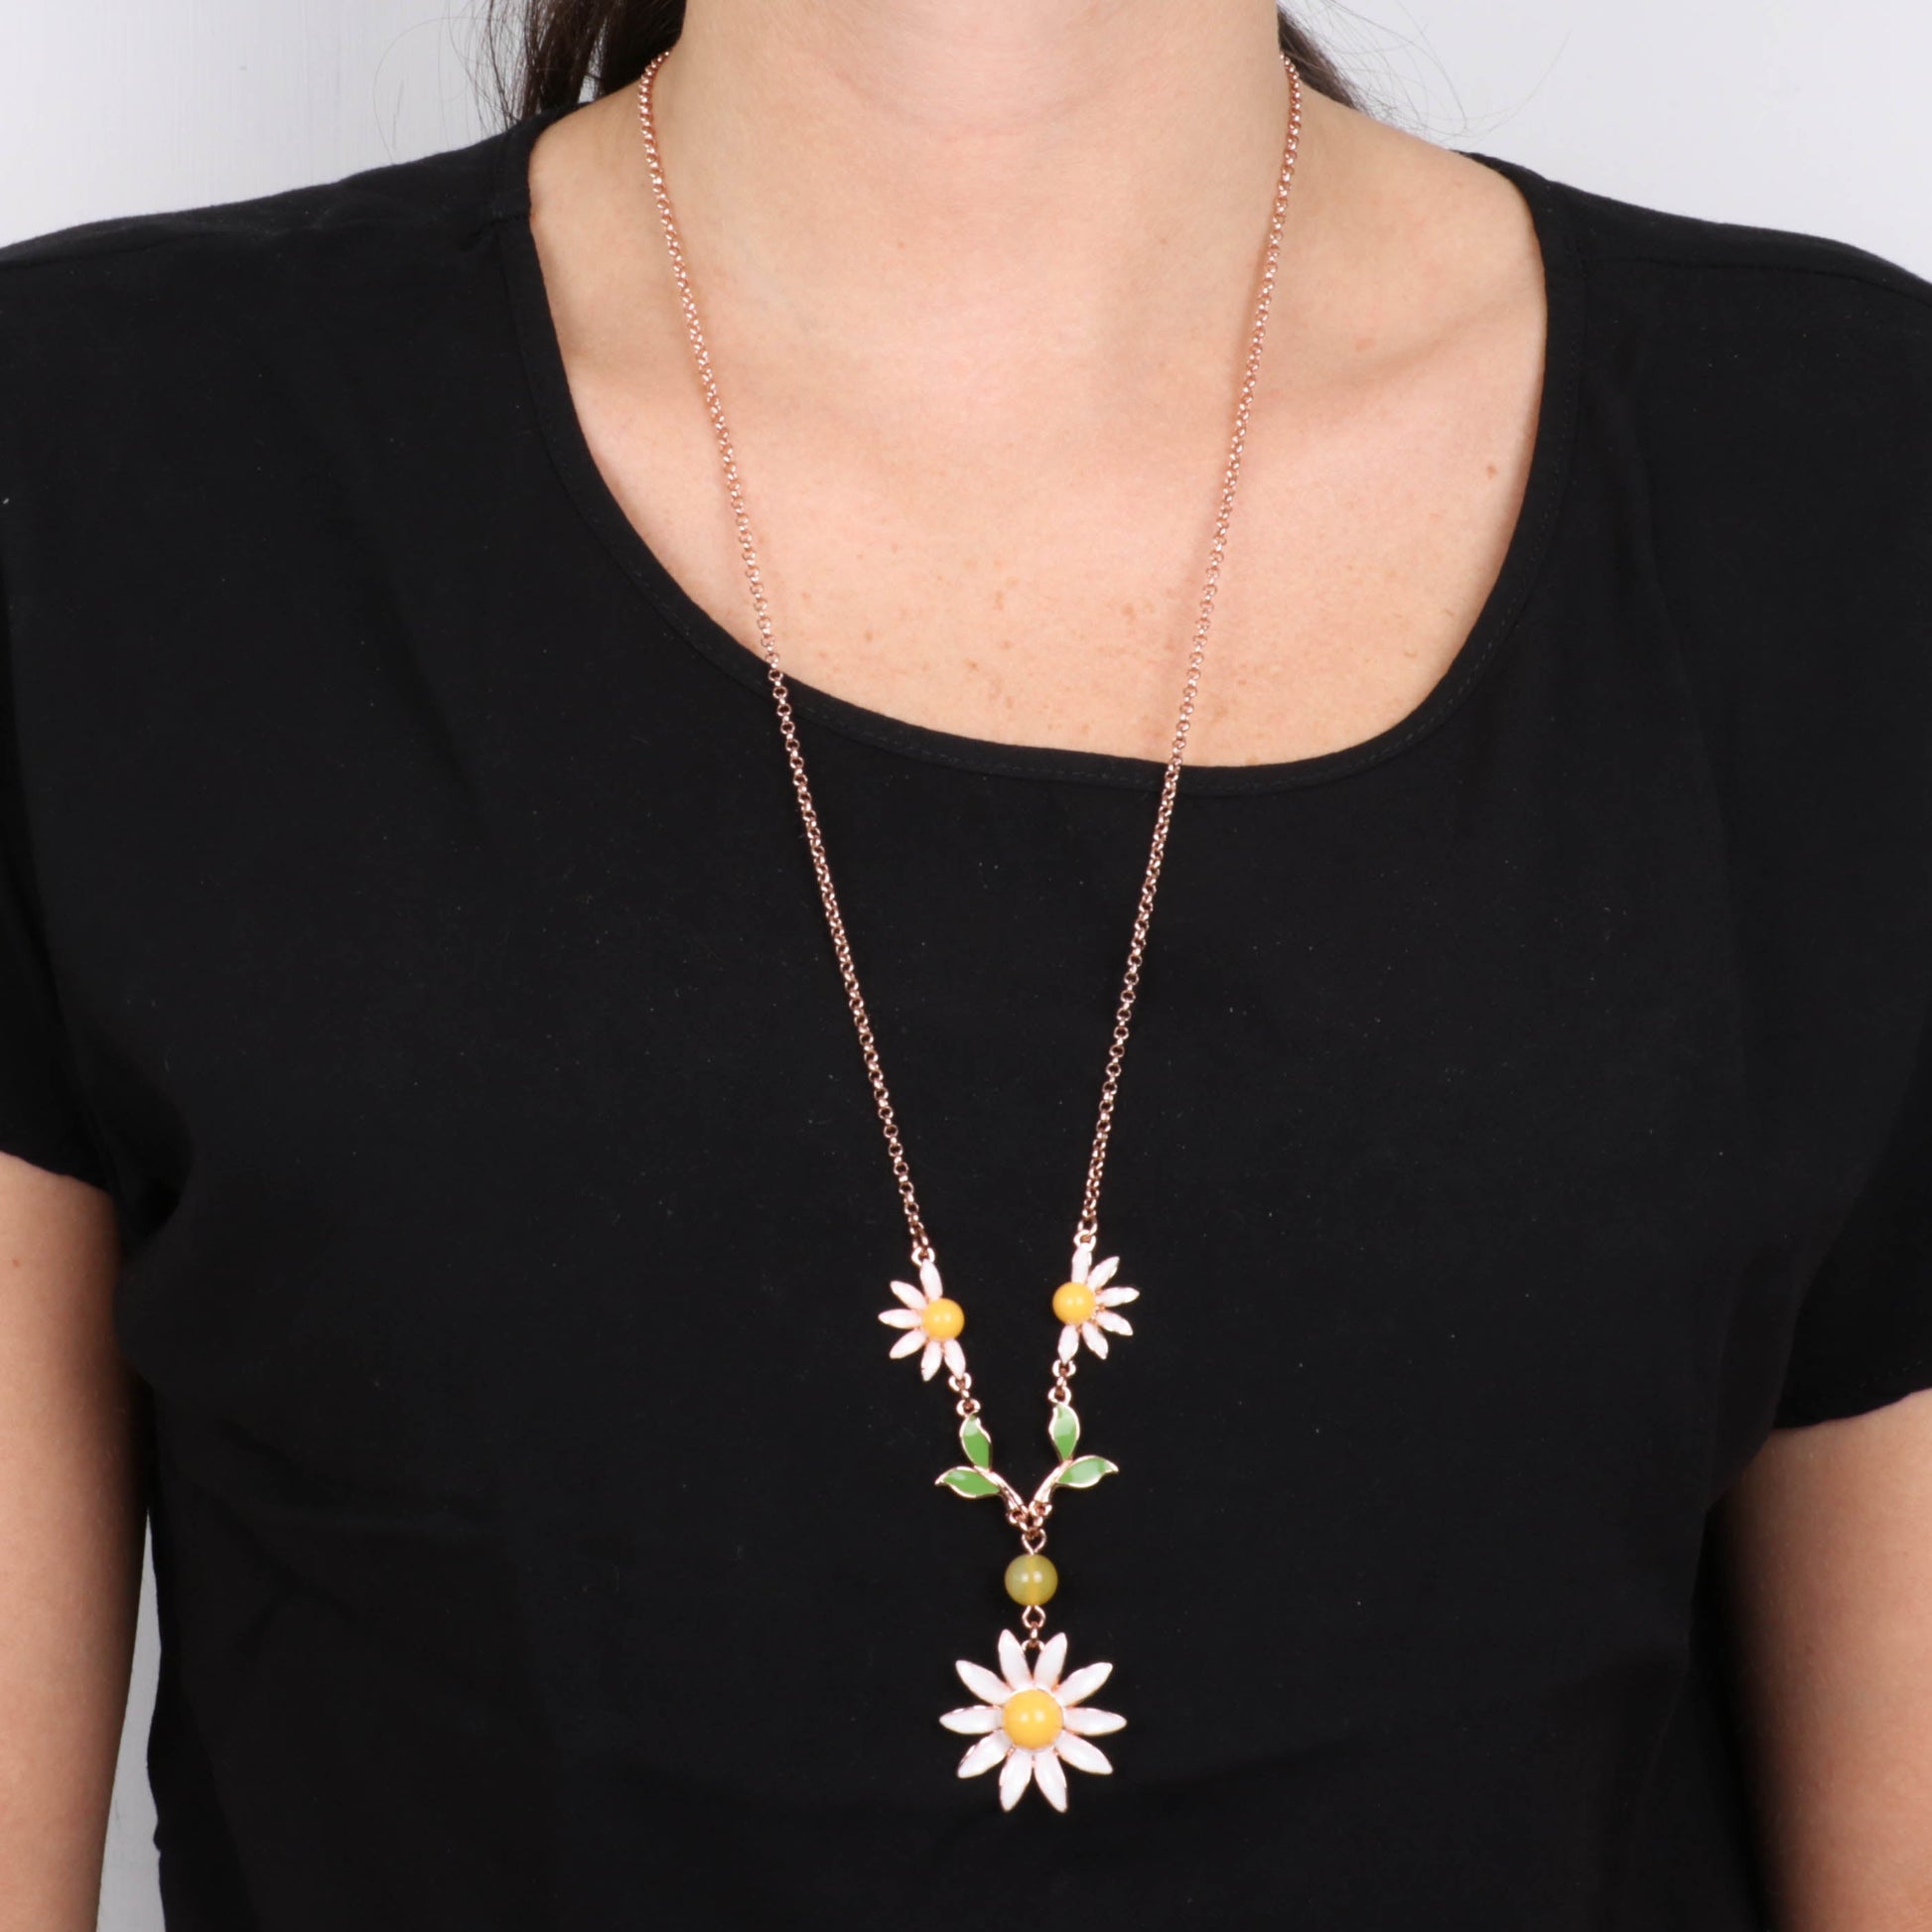 Metal necklace with margherita pendant embellished with colored glazes